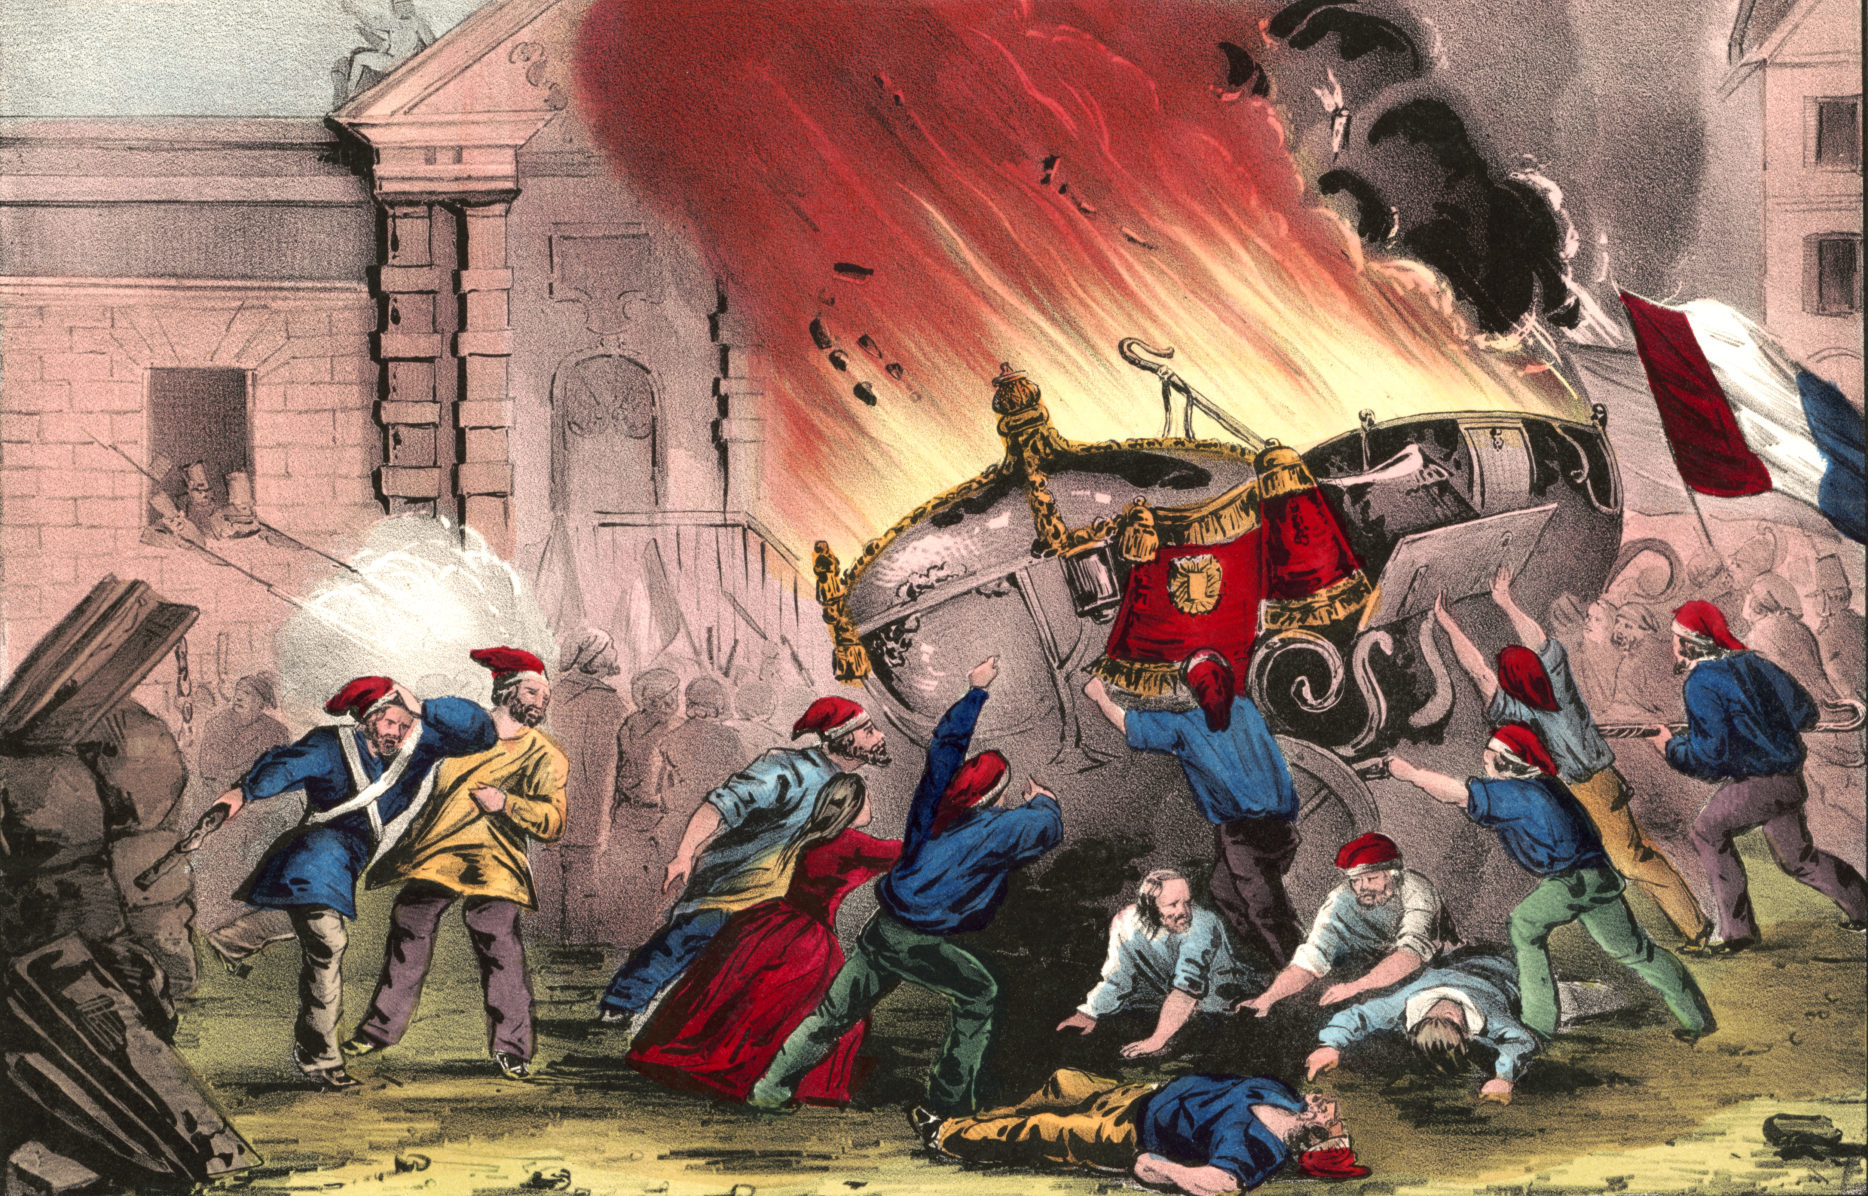 The French revolution burning the royal carriages at the Chateau d’Eu, Feby. 24, 1848